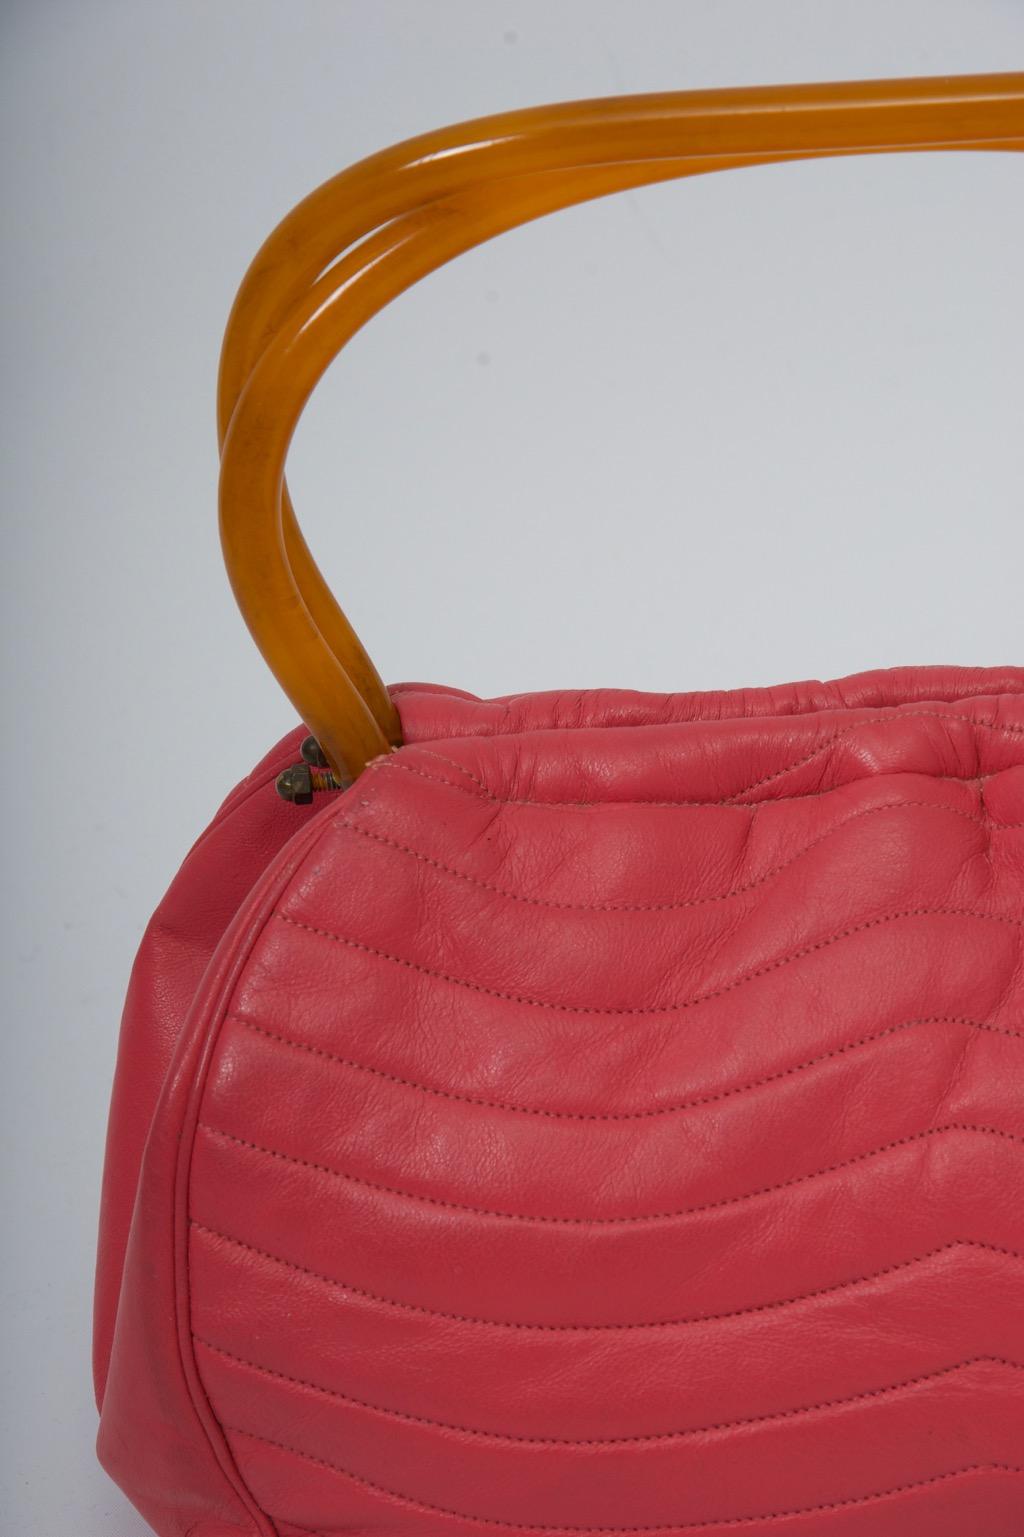 MM handbag c.1960s in dark pink, the leather featuring horizontal, curved stitching resulting in a quilted effect. The faux tortoise handles echo the shape of the bag and snap together to close. A coordinating faille interior has an attached money